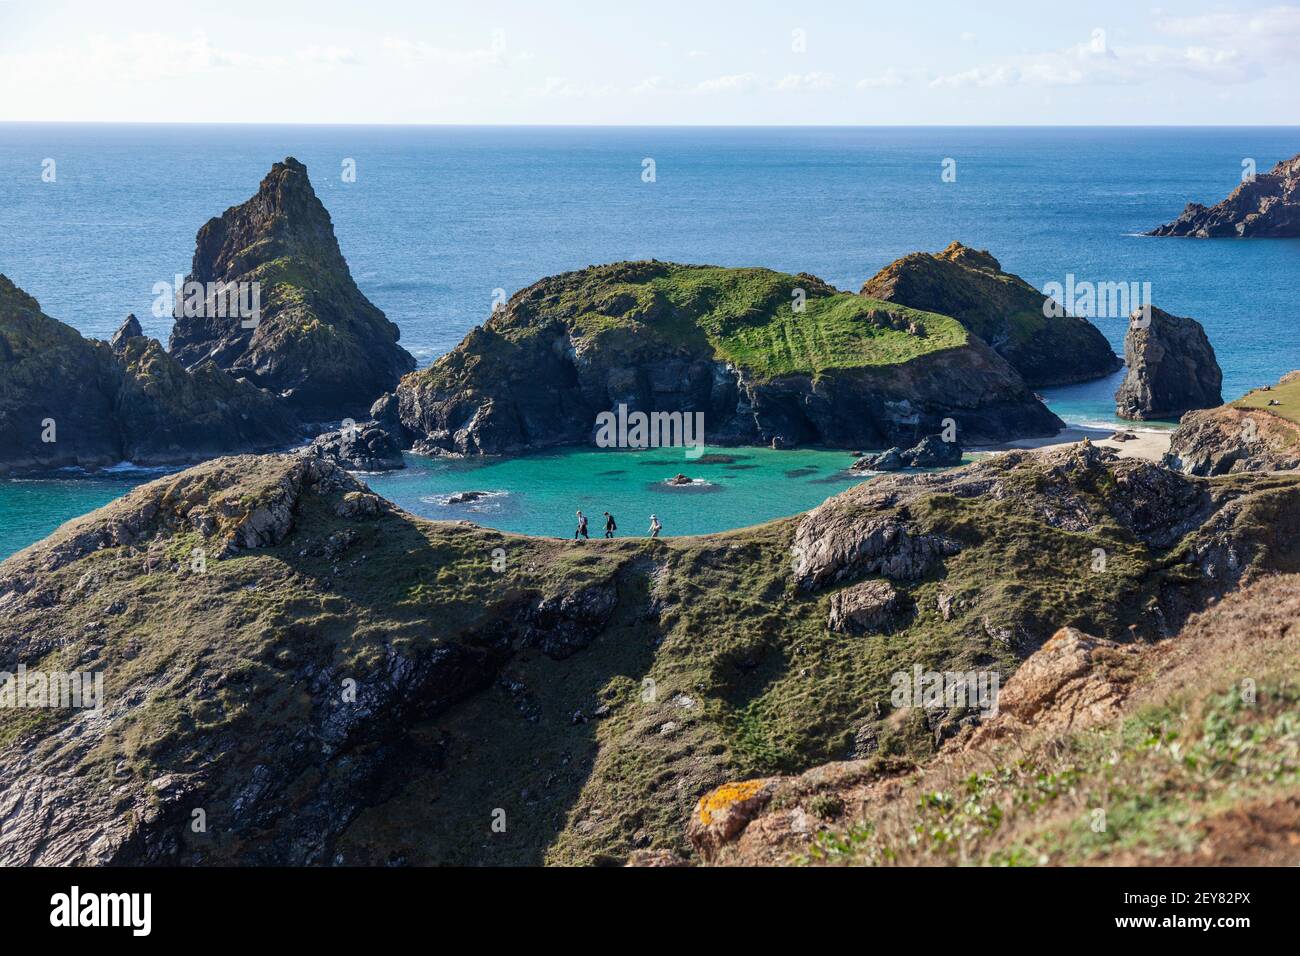 Elevated view of walkers on a ridge overlooking Kynance Cove on the Lizard peninsula in Cornwall, UK on a sunny day Stock Photo